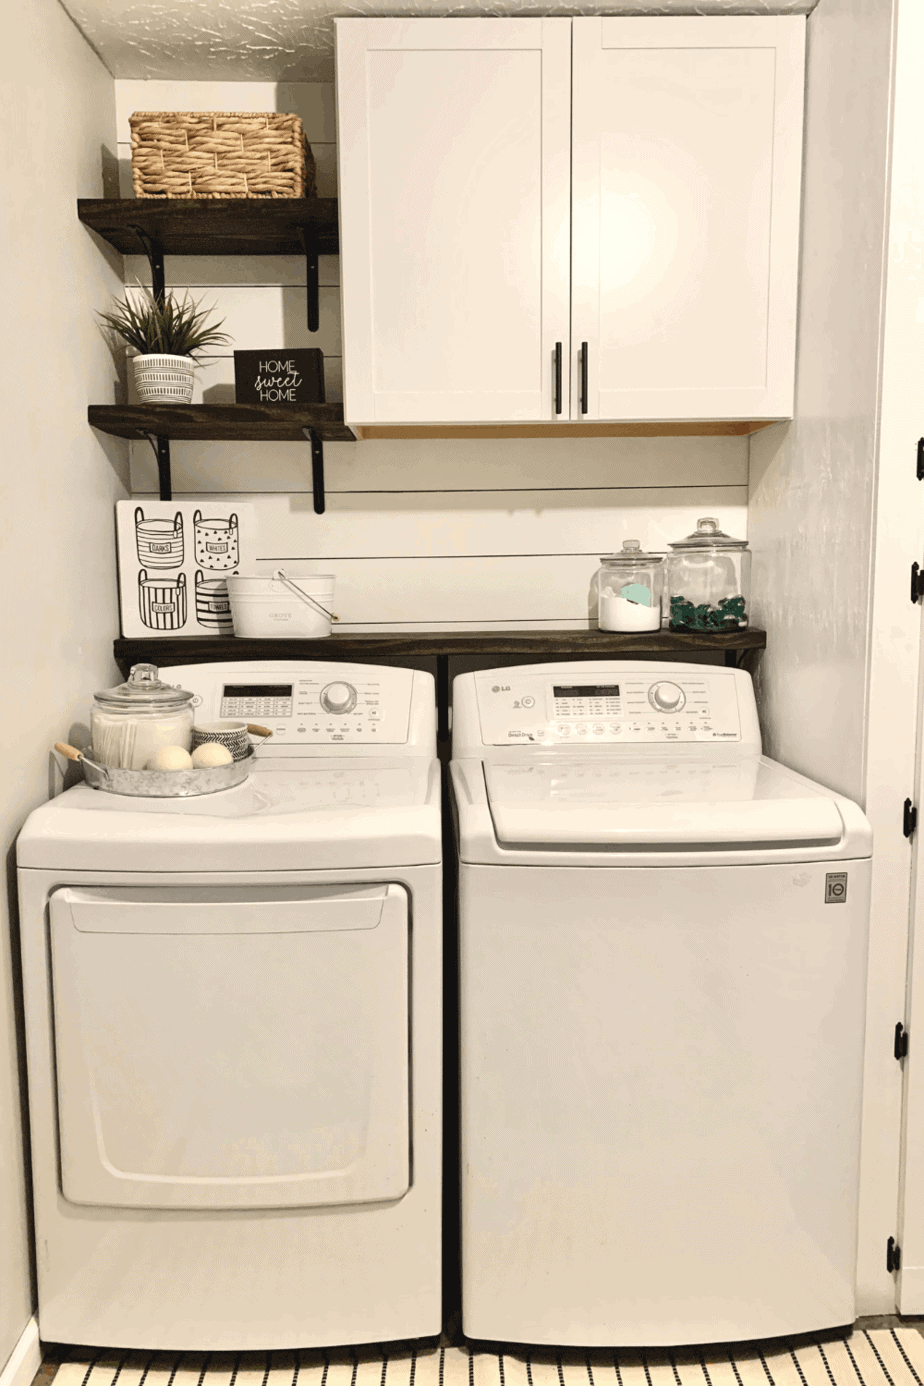 How to Easily Hang a Shelf & Hooks in the Laundry Room